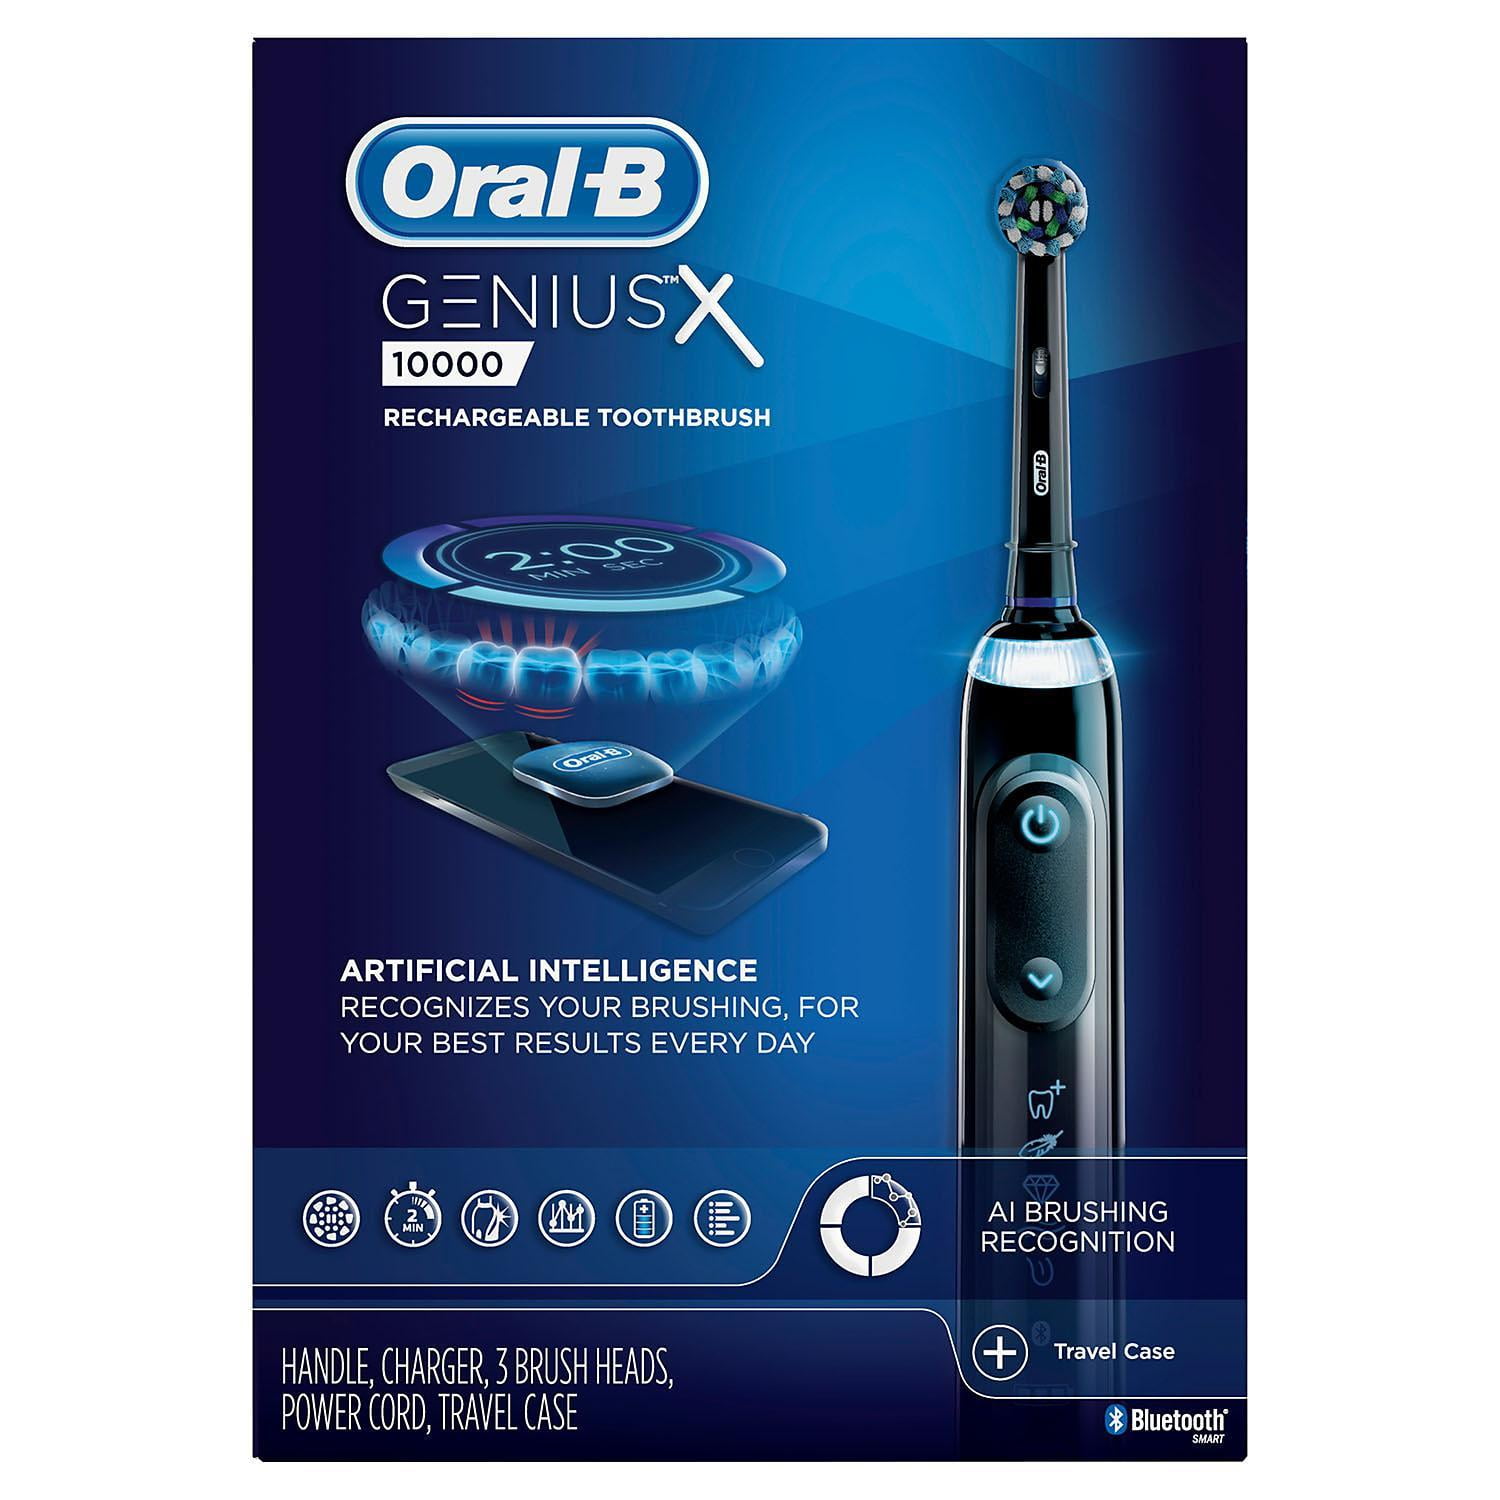 oral-b-genius-x-10000-rechargeable-electric-toothbrush-with-artificial